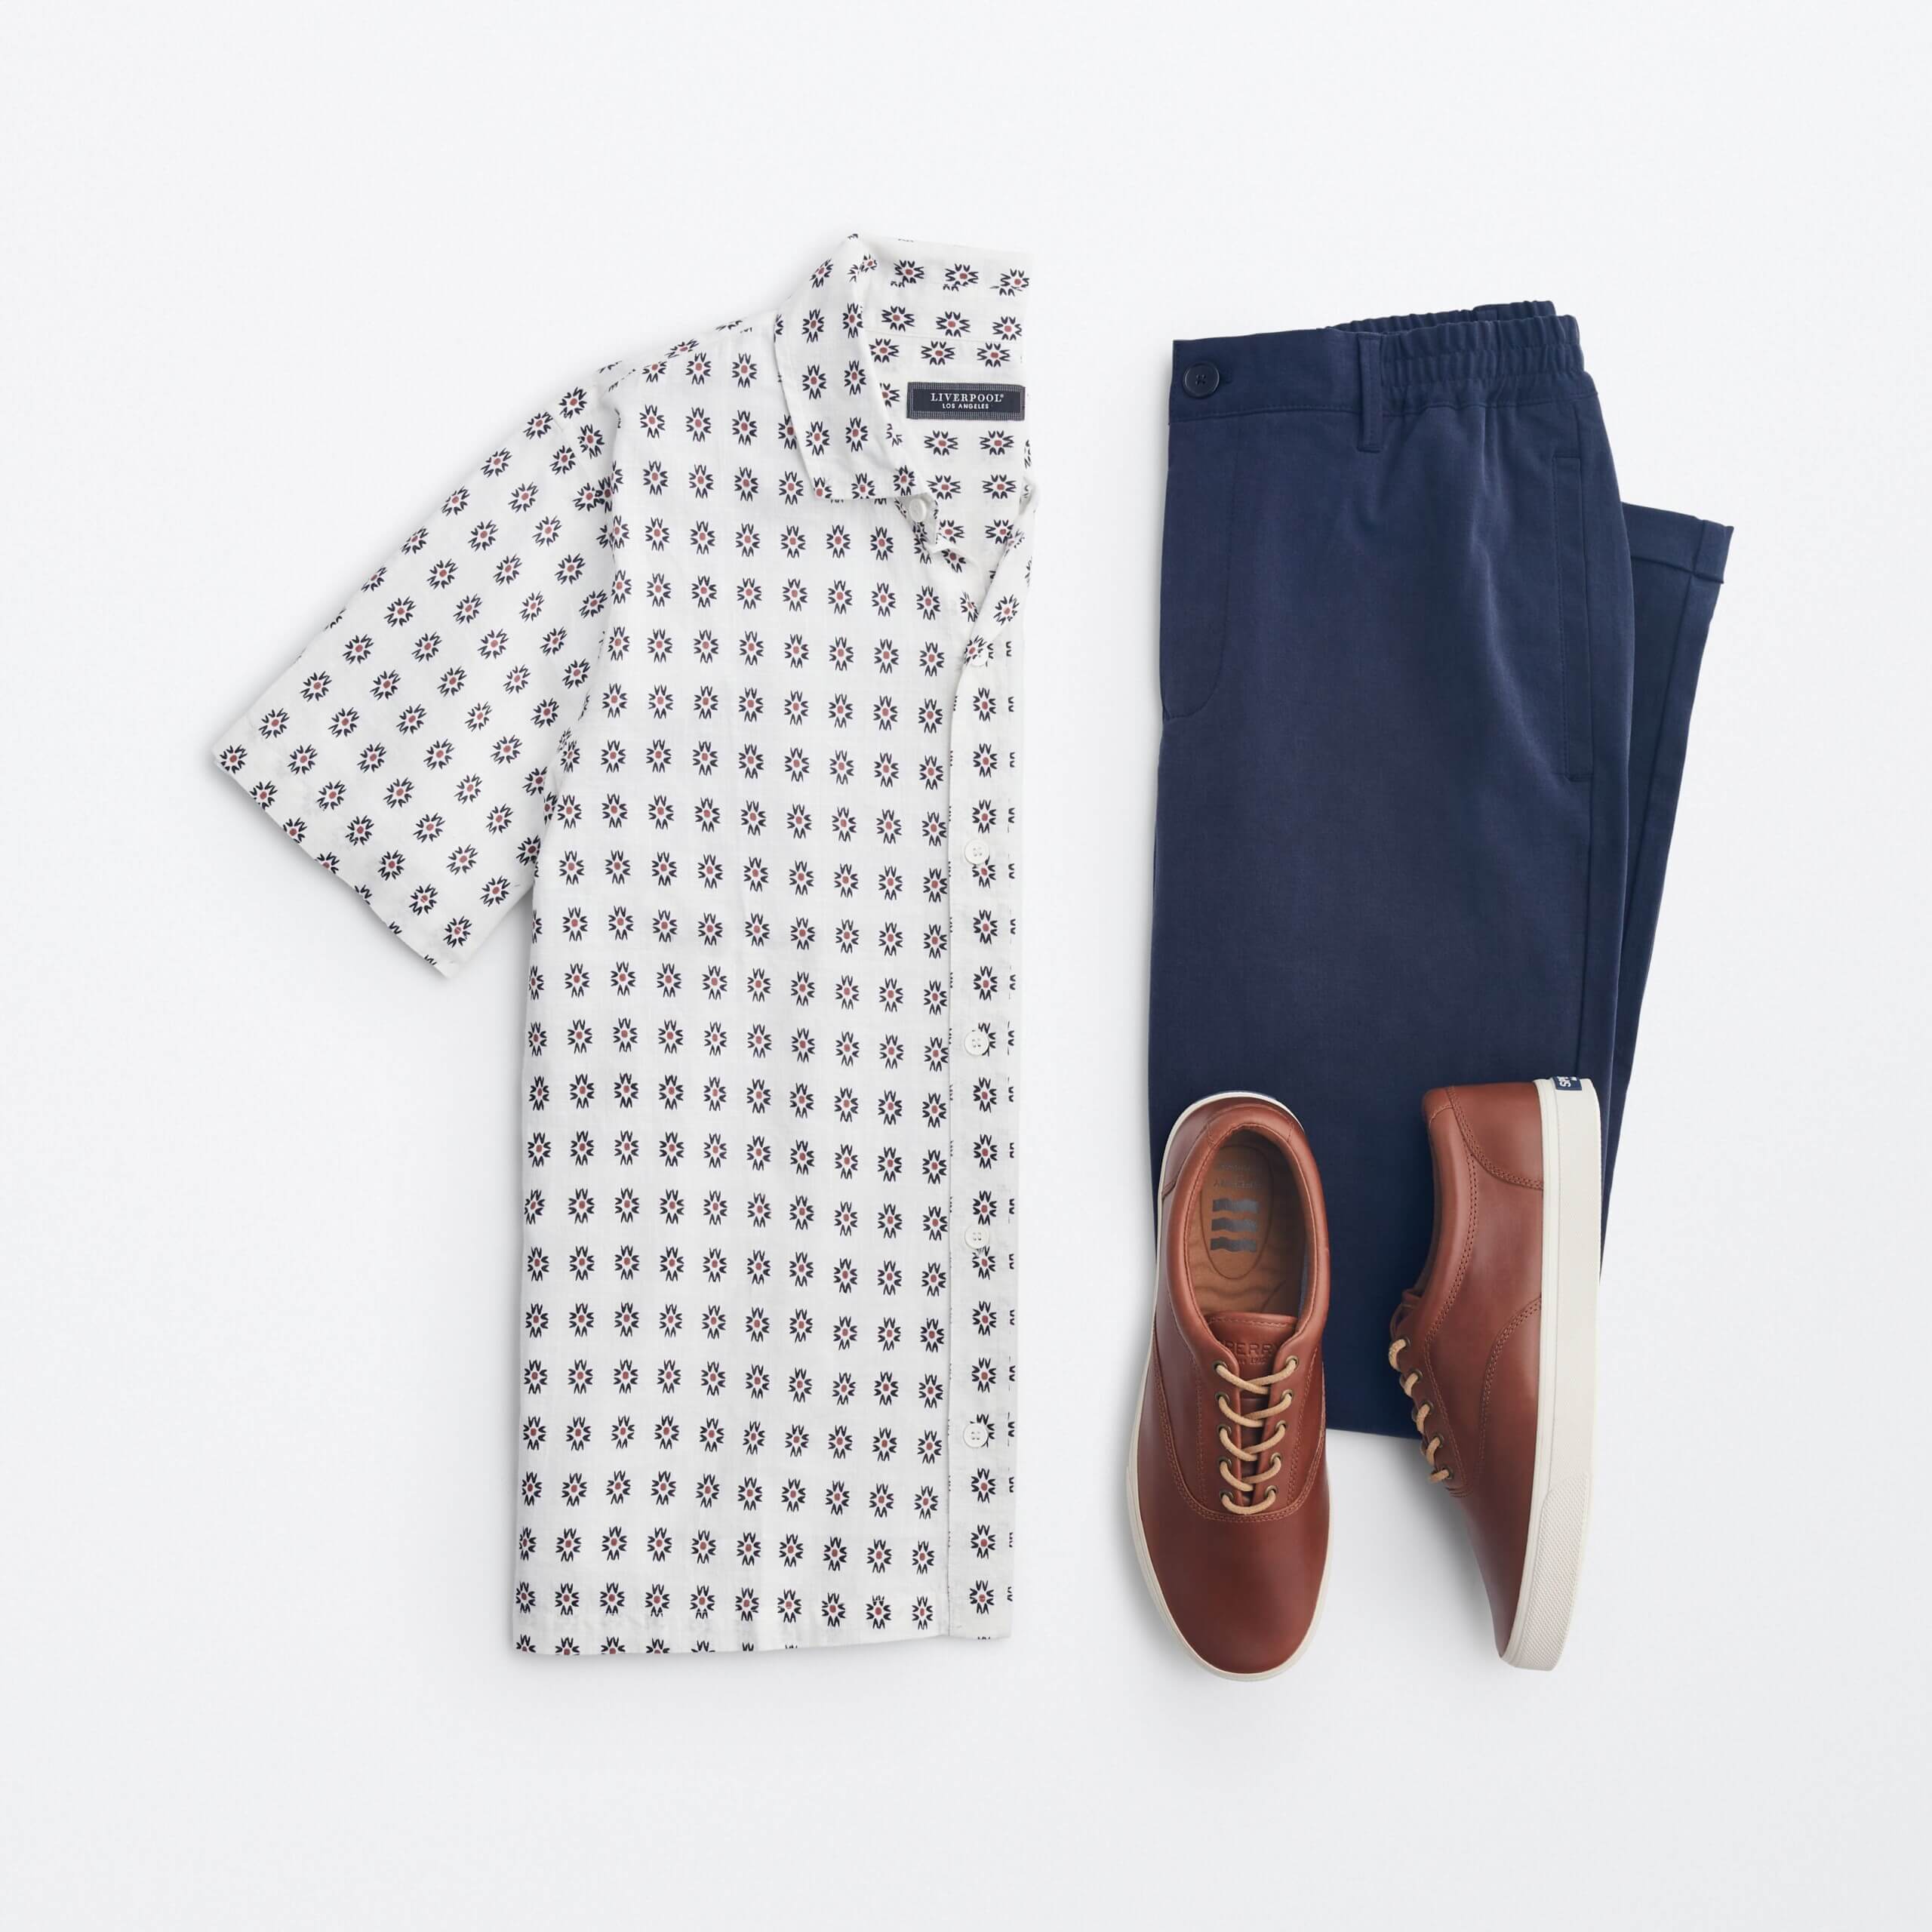 Stylish Men's Linen Pants Outfits This Summer - The Jacket Maker Blog